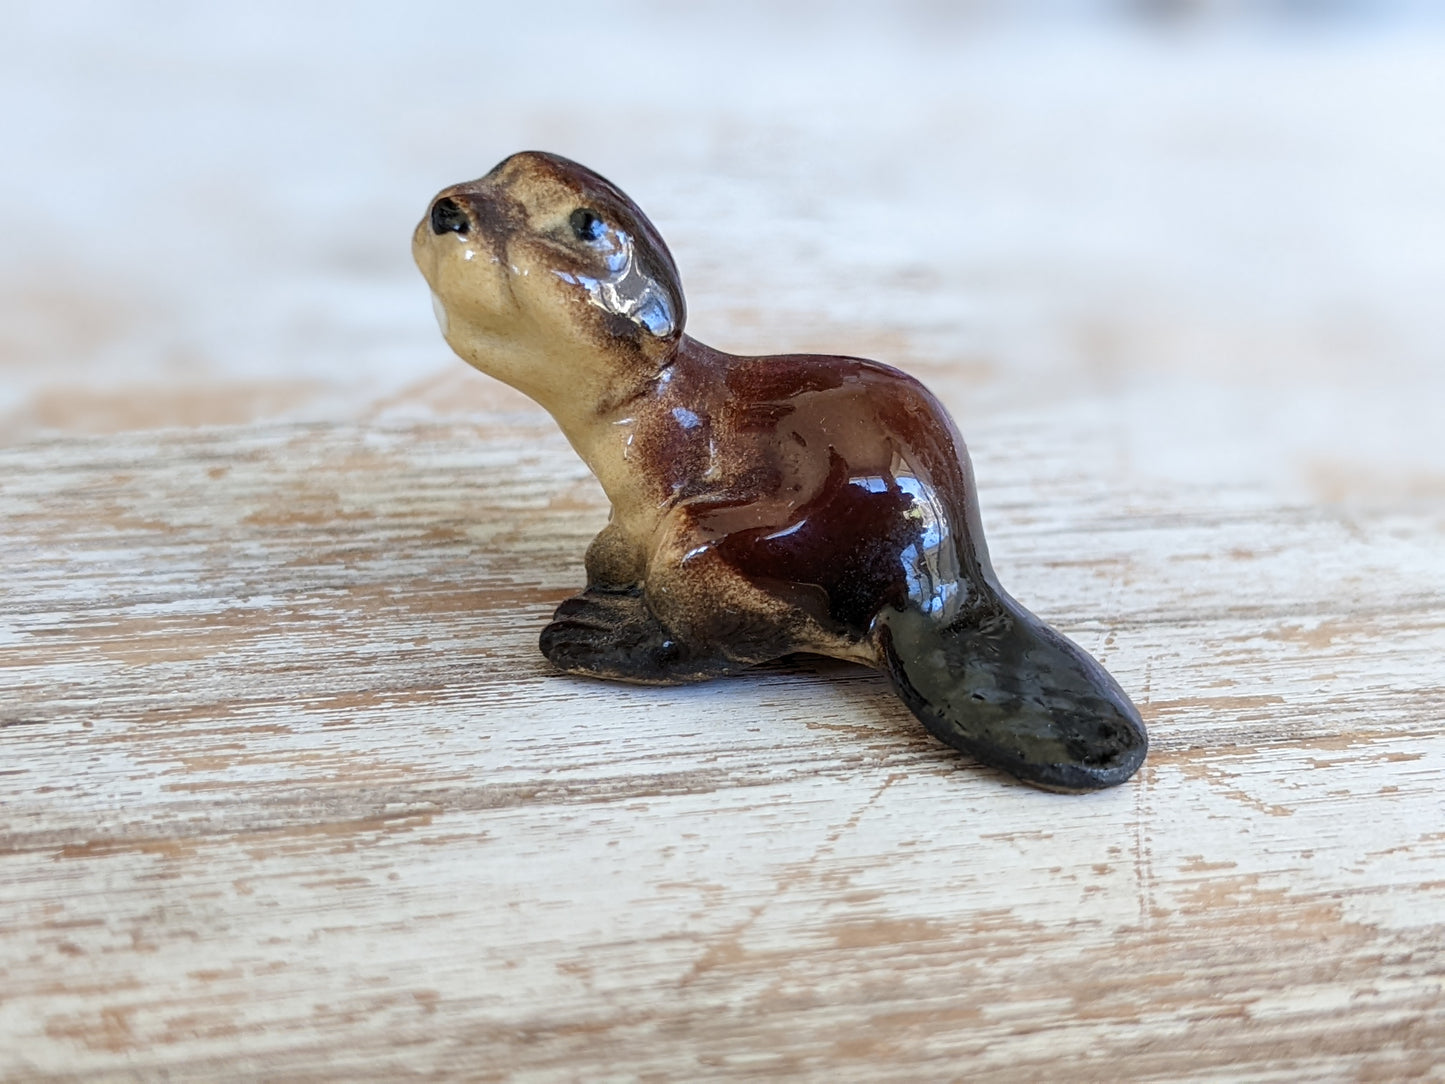 1980s Hagen Renaker Beaver Porcelain Miniature Hand-painted !! Amazing Retro Gifts & Collectibles !!